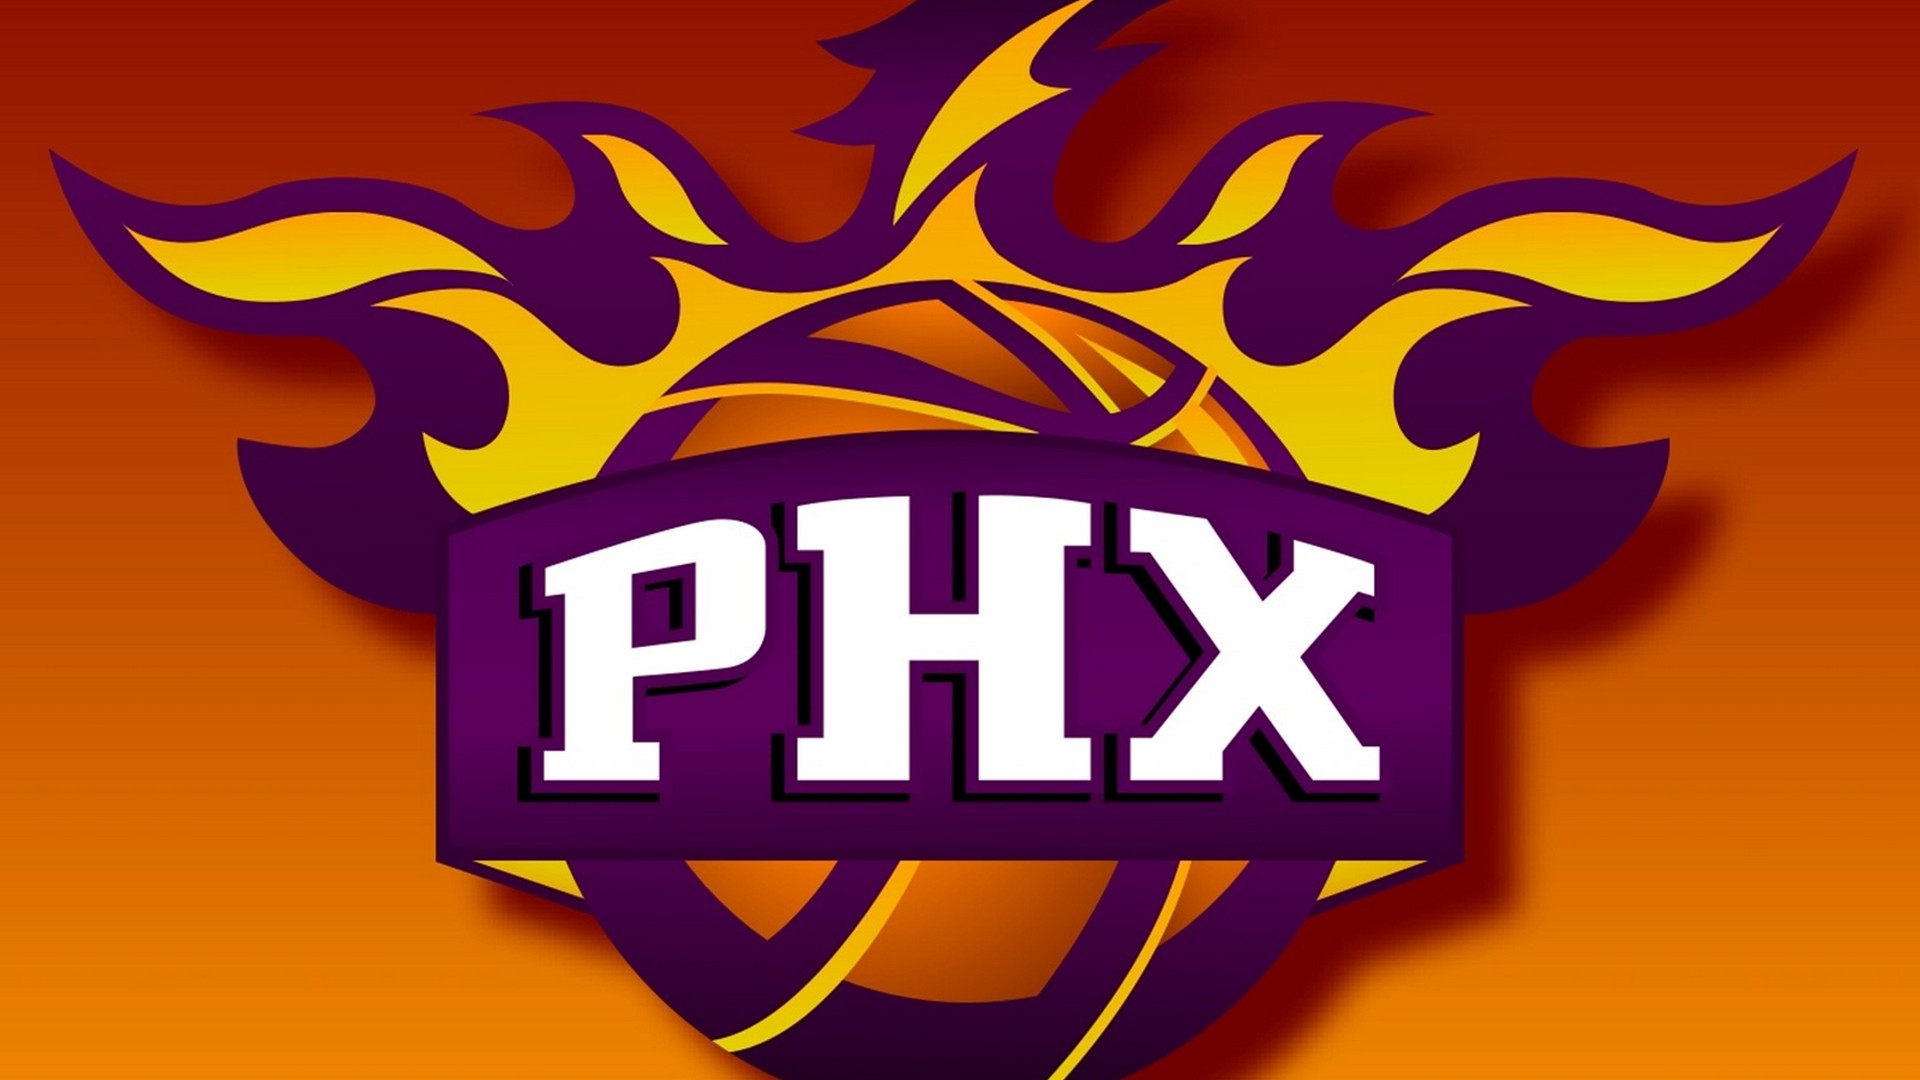 Phoenix Suns Logo For Desktop Wallpaper with high-resolution 1920x1080 pixel. You can use this wallpaper for your Desktop Computer Backgrounds, Windows or Mac Screensavers, iPhone Lock screen, Tablet or Android and another Mobile Phone device